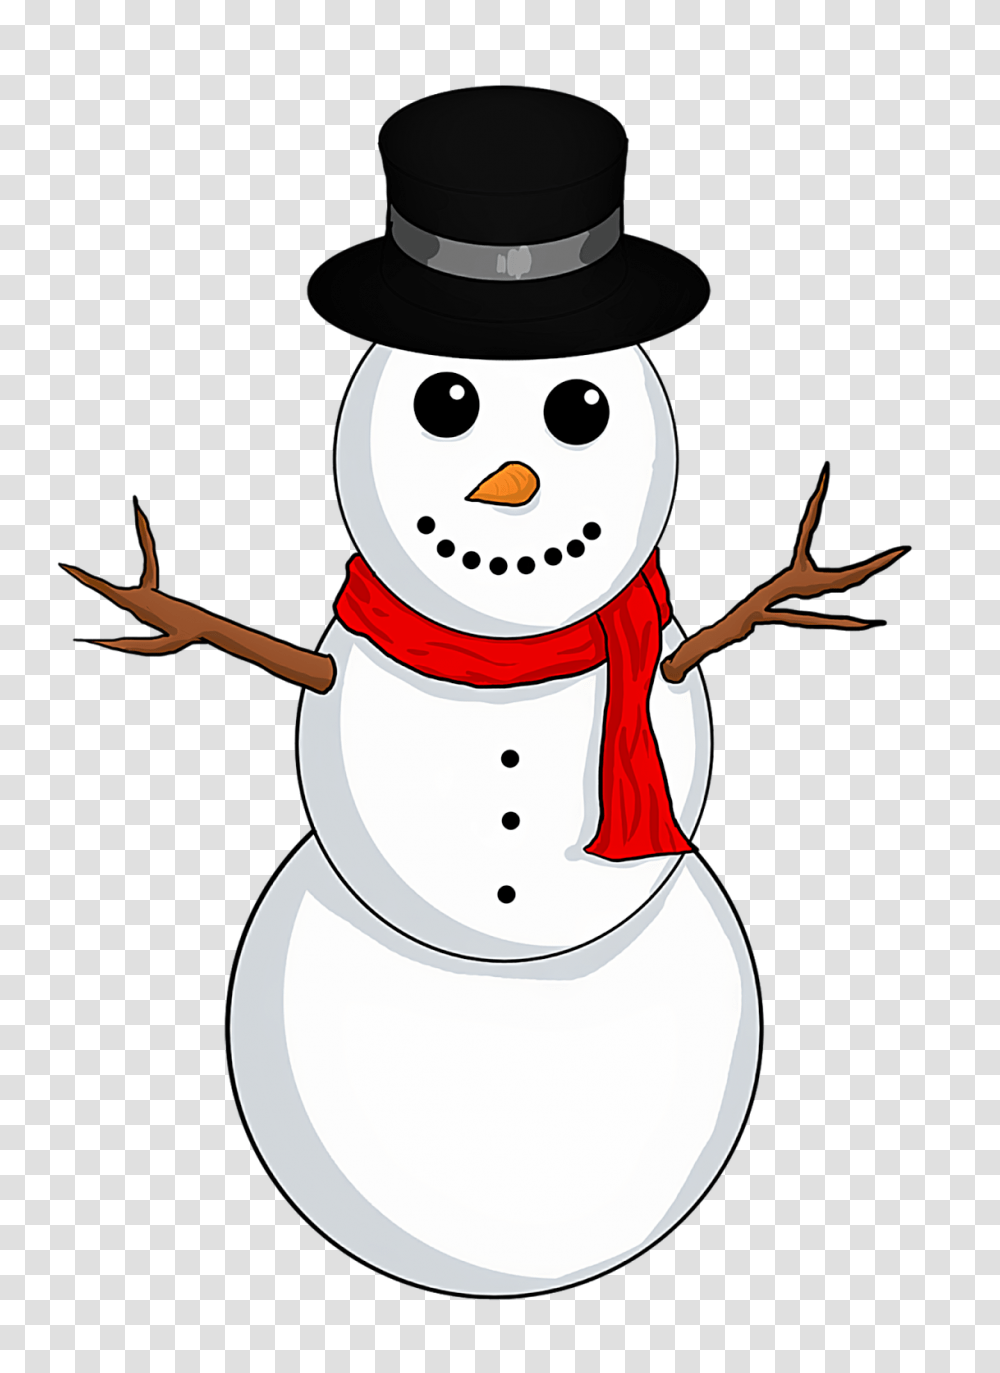 Happy New Year Clipart Images For 7 2 Wikiclipart Clip Art Snow Man, Snowman, Winter, Outdoors, Nature Transparent Png